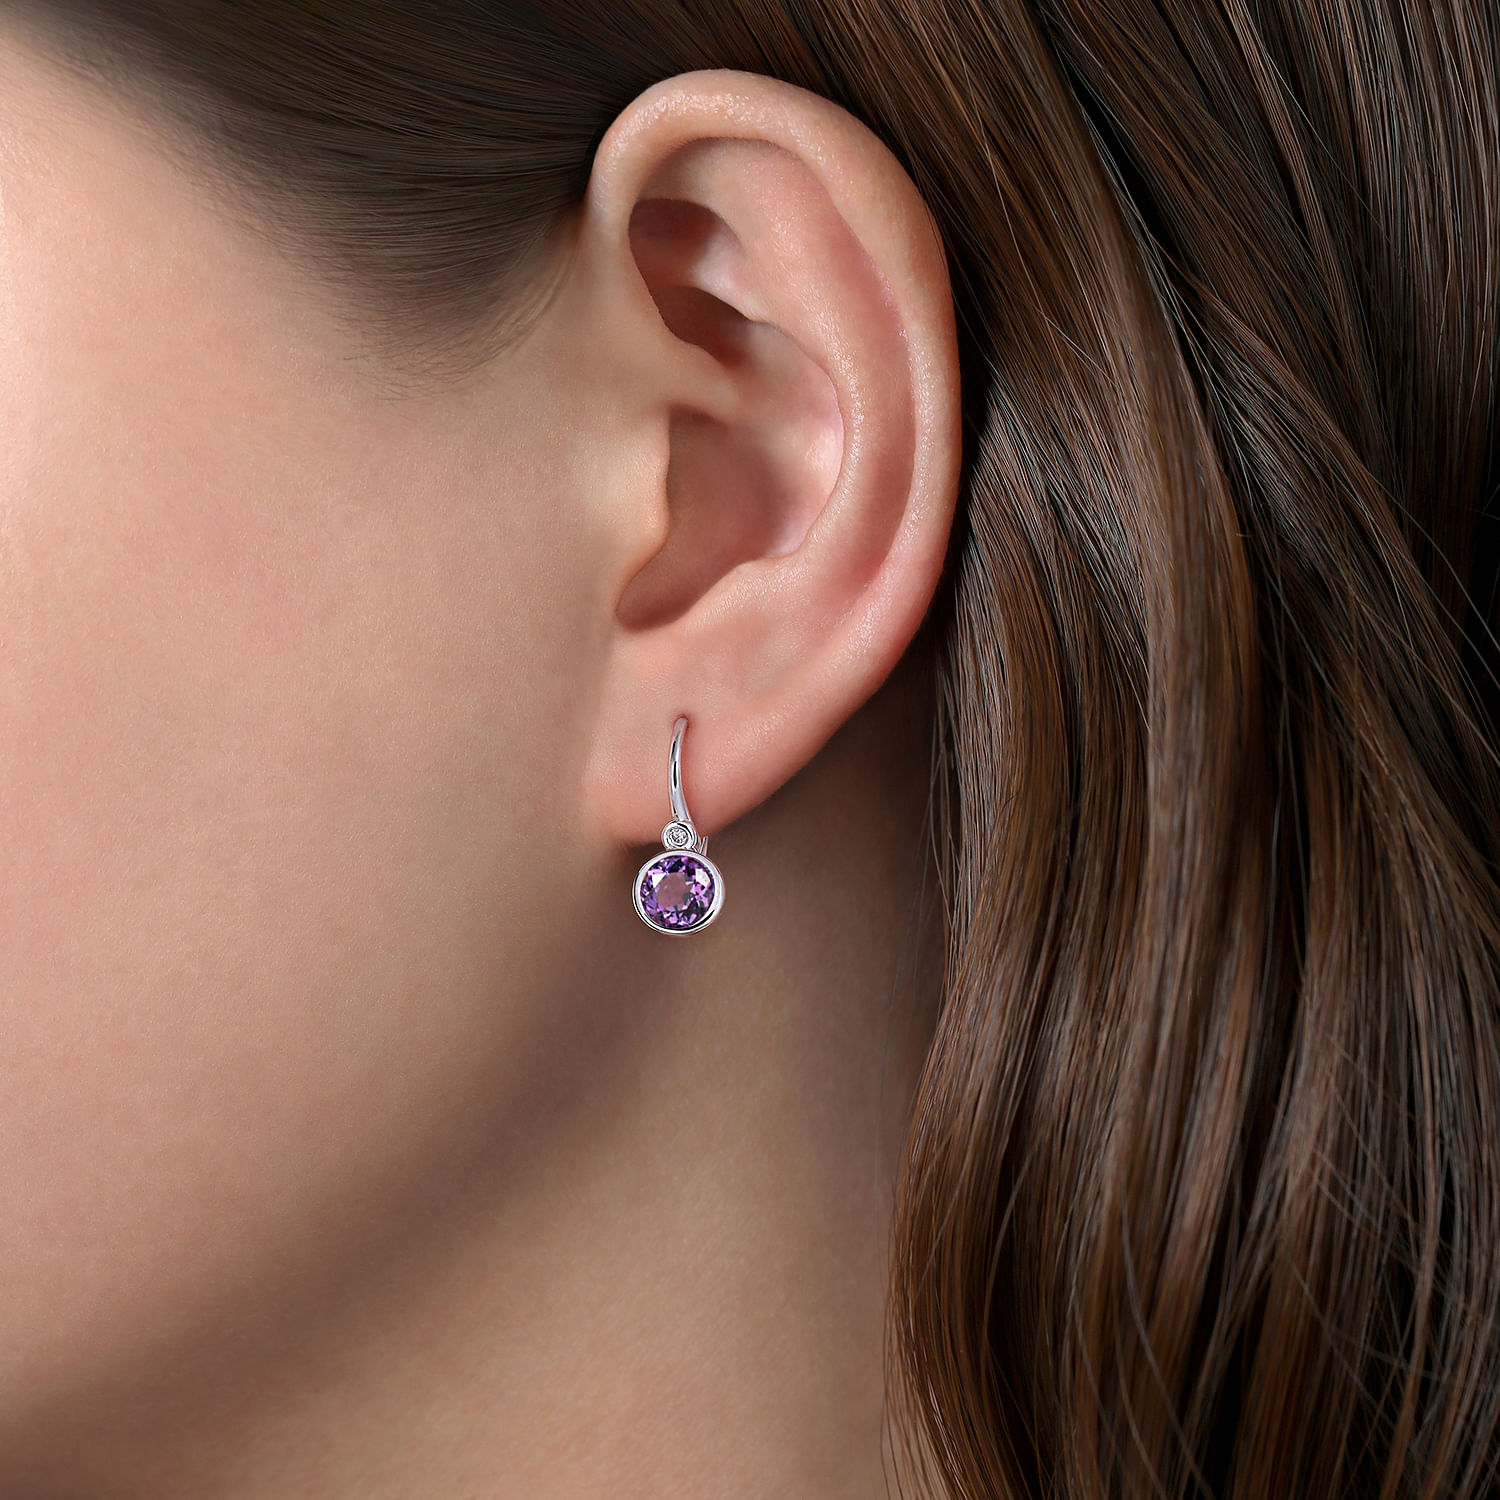 925 Sterling Silver Amethyst and Diamond Leverback Earrings